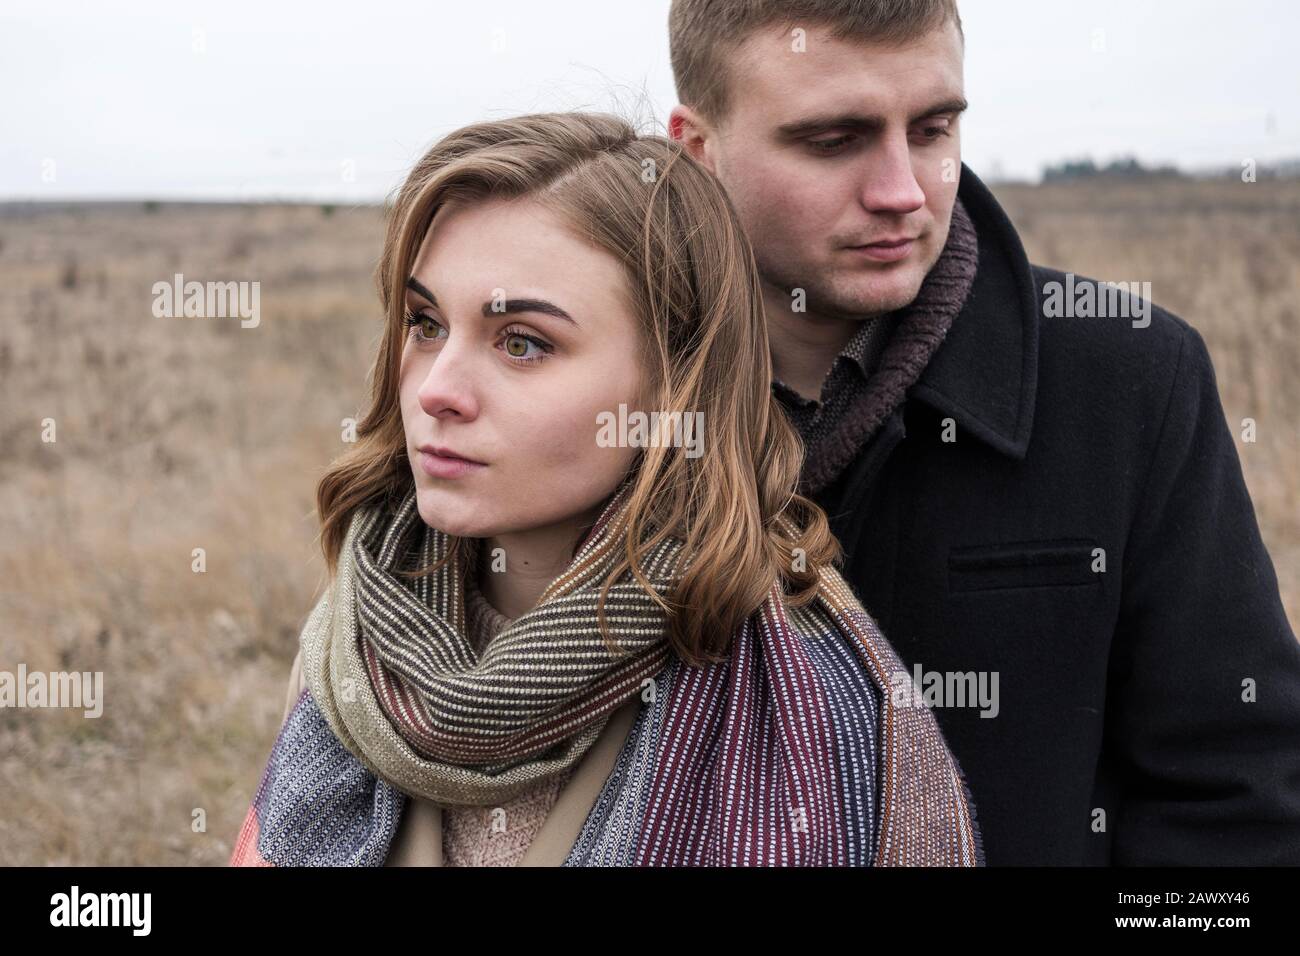 Serious troubled couple standing close together looking away from each other Stock Photo